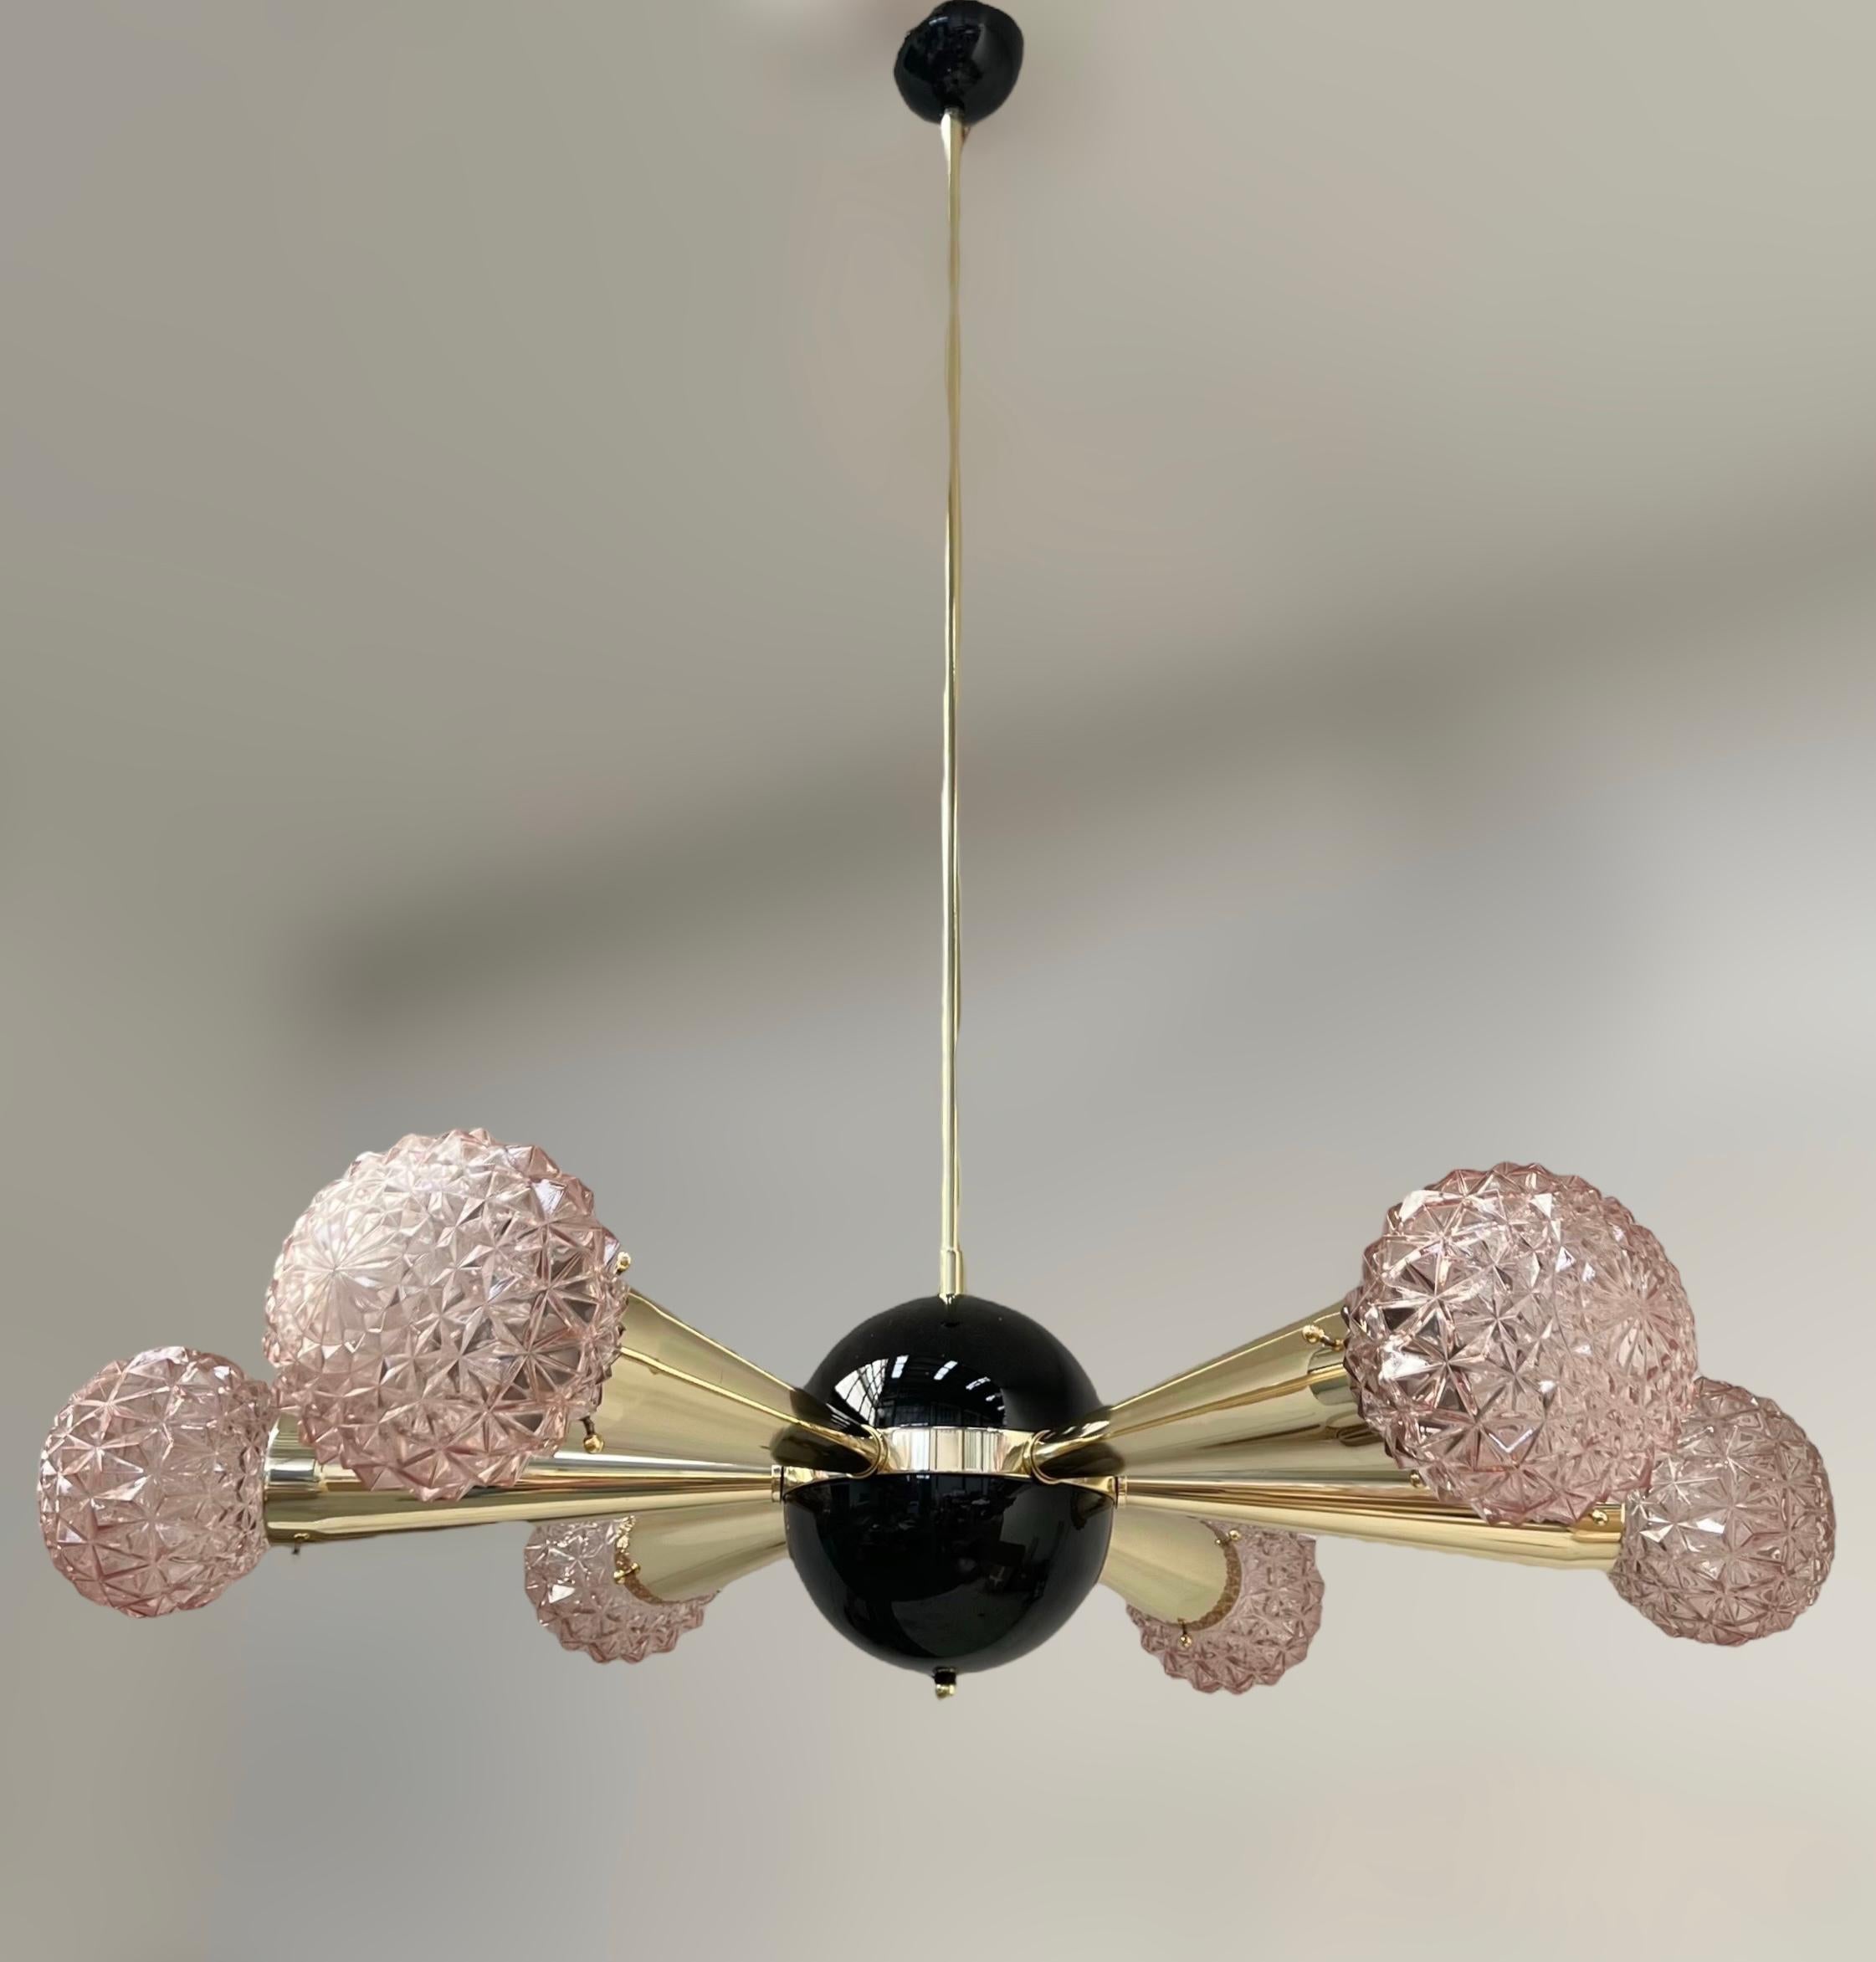 Italian chandelier with pink faceted Murano glass shades, mounted on polished brass frame with black enameled center and ceiling canopy / Designed by Fabio Bergomi for Fabio Ltd / Made in Italy
6 lights / E12 or E14 type / max 40W each
Measures: